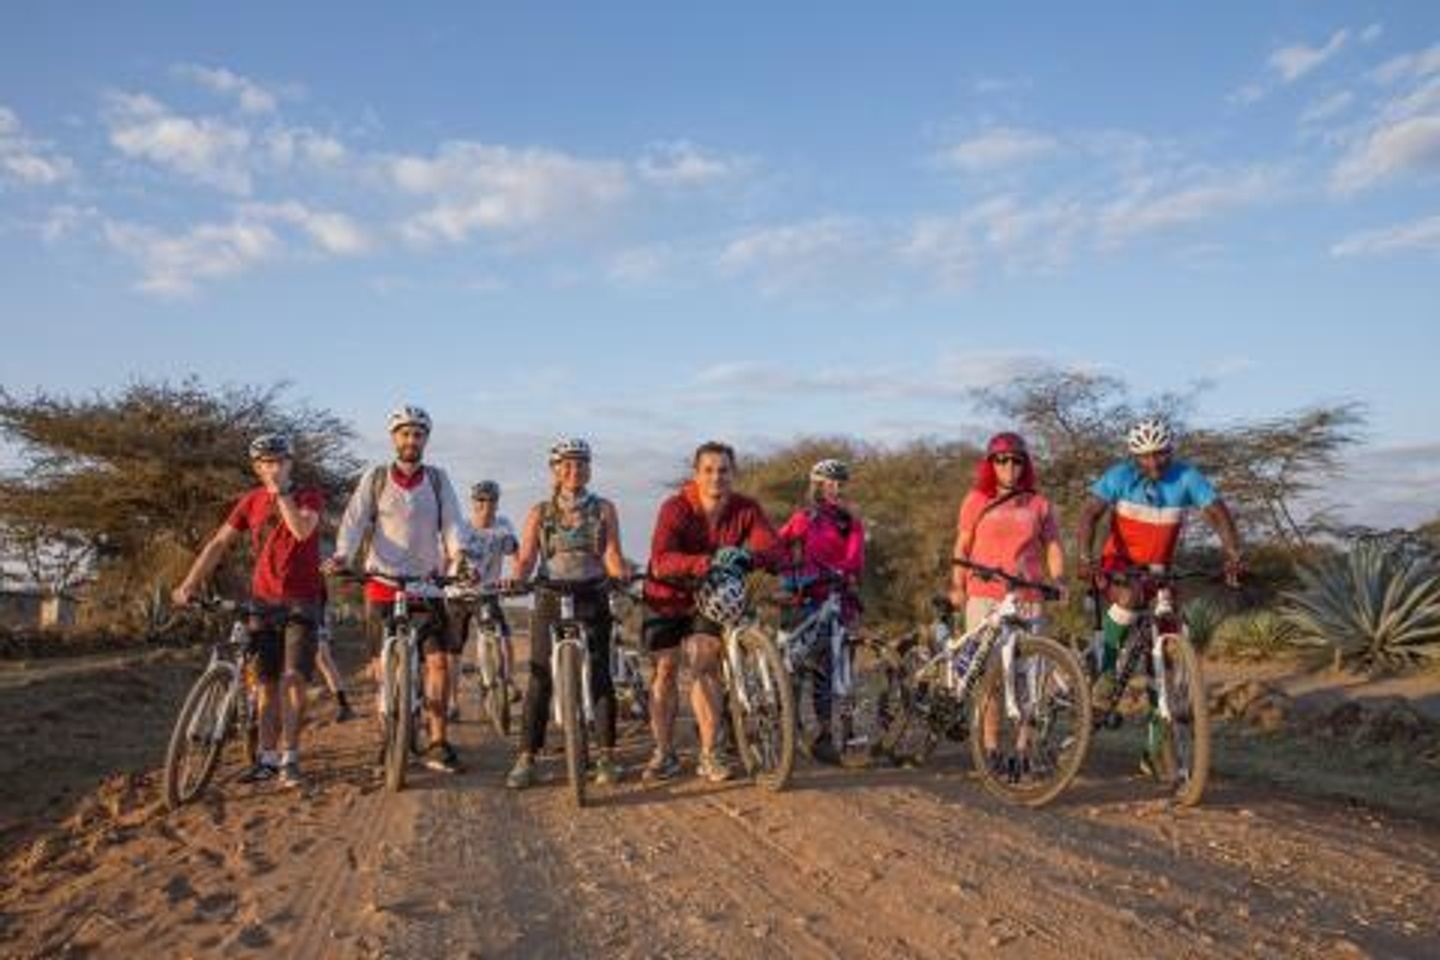 13 Day Venture off the beaten track on a two-wheeled trip across TZ